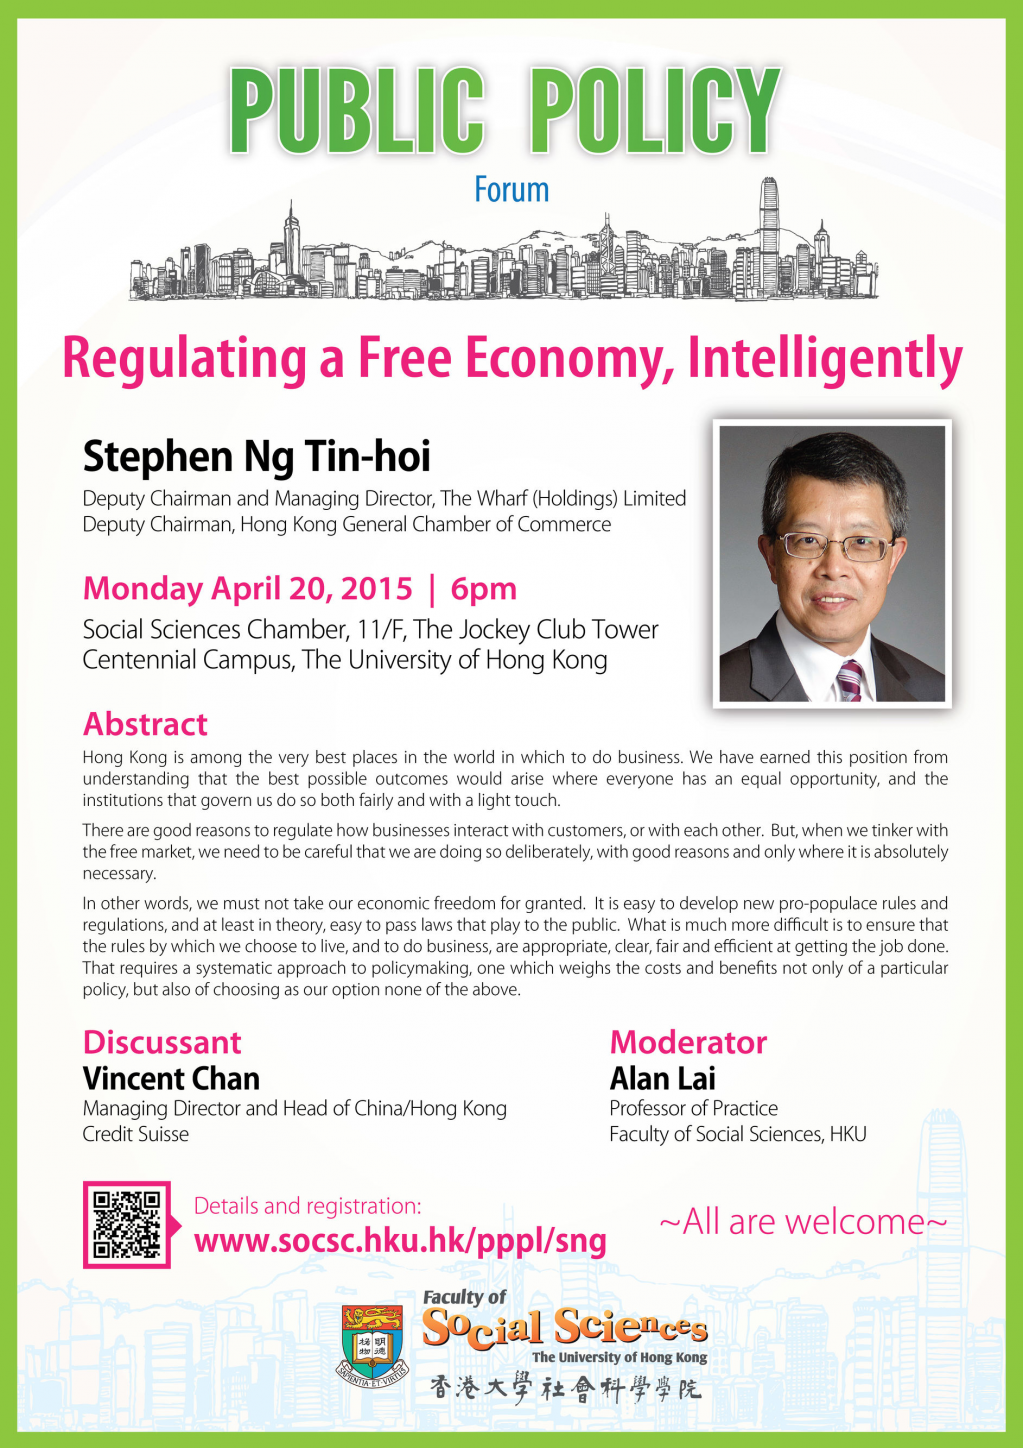 Public Policy Forum on Regulating a Free Economy, Intelligently